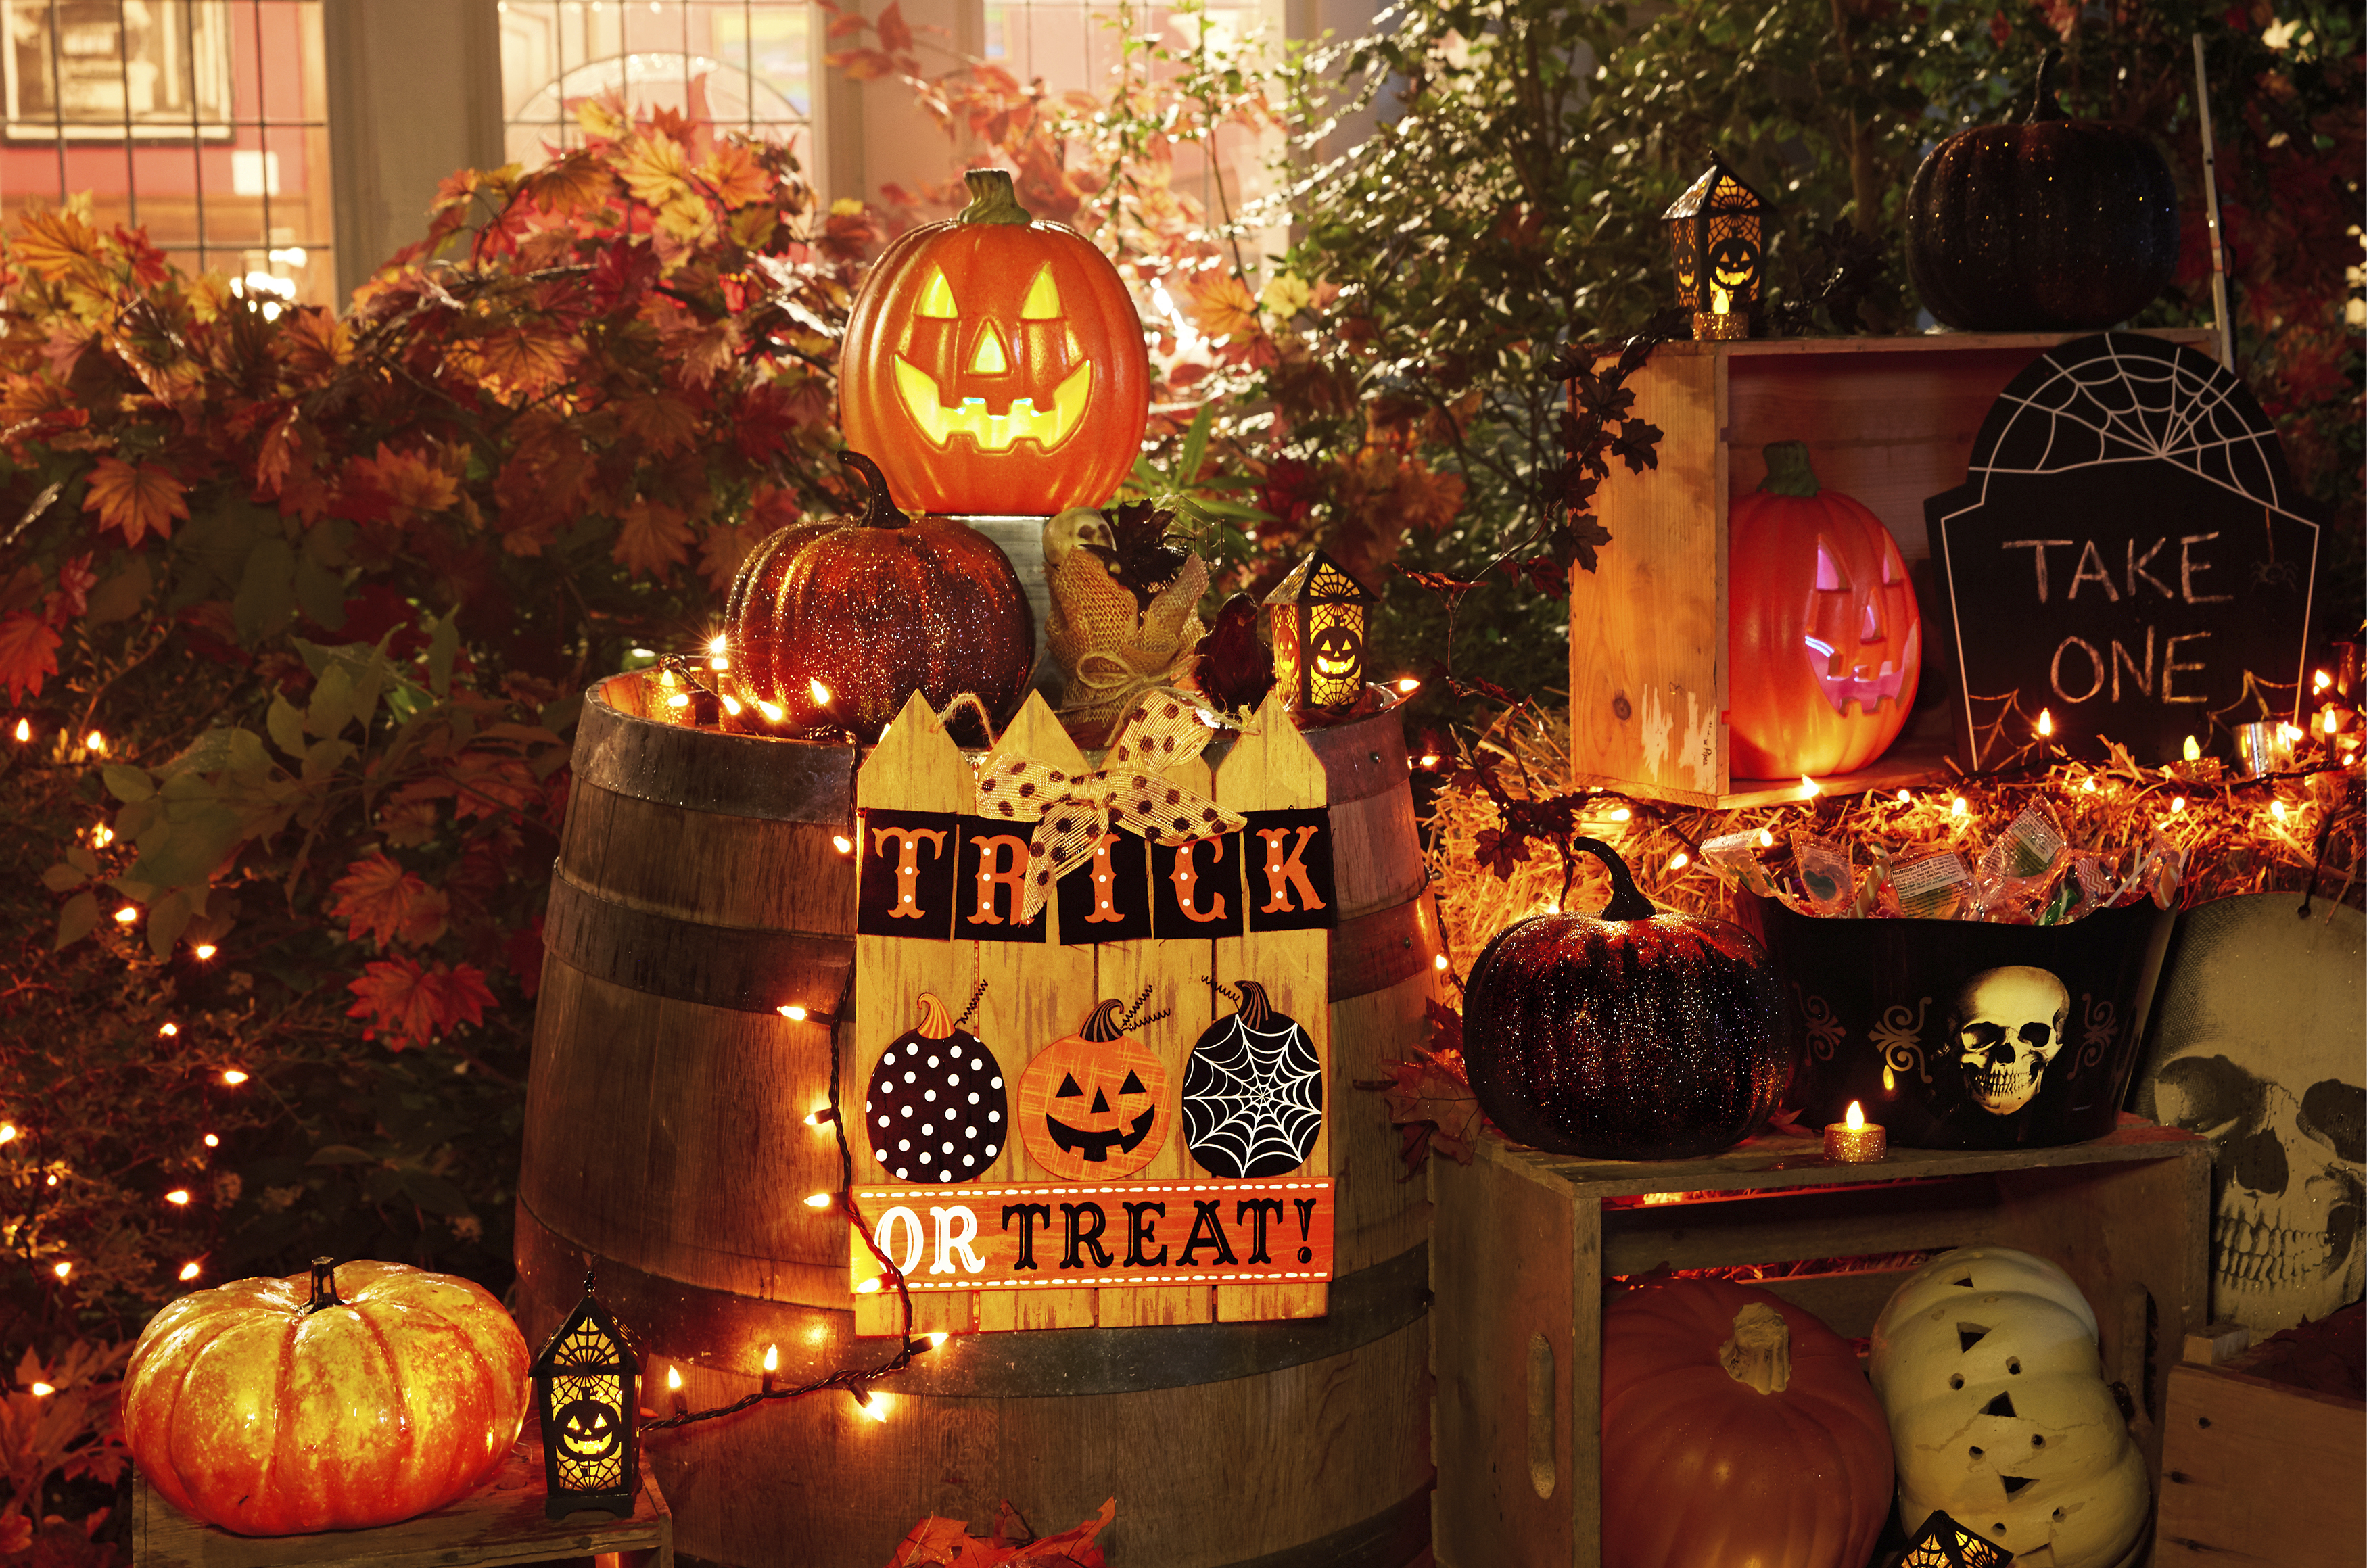 Choosing a theme for Halloween decorations | The Daily Courier